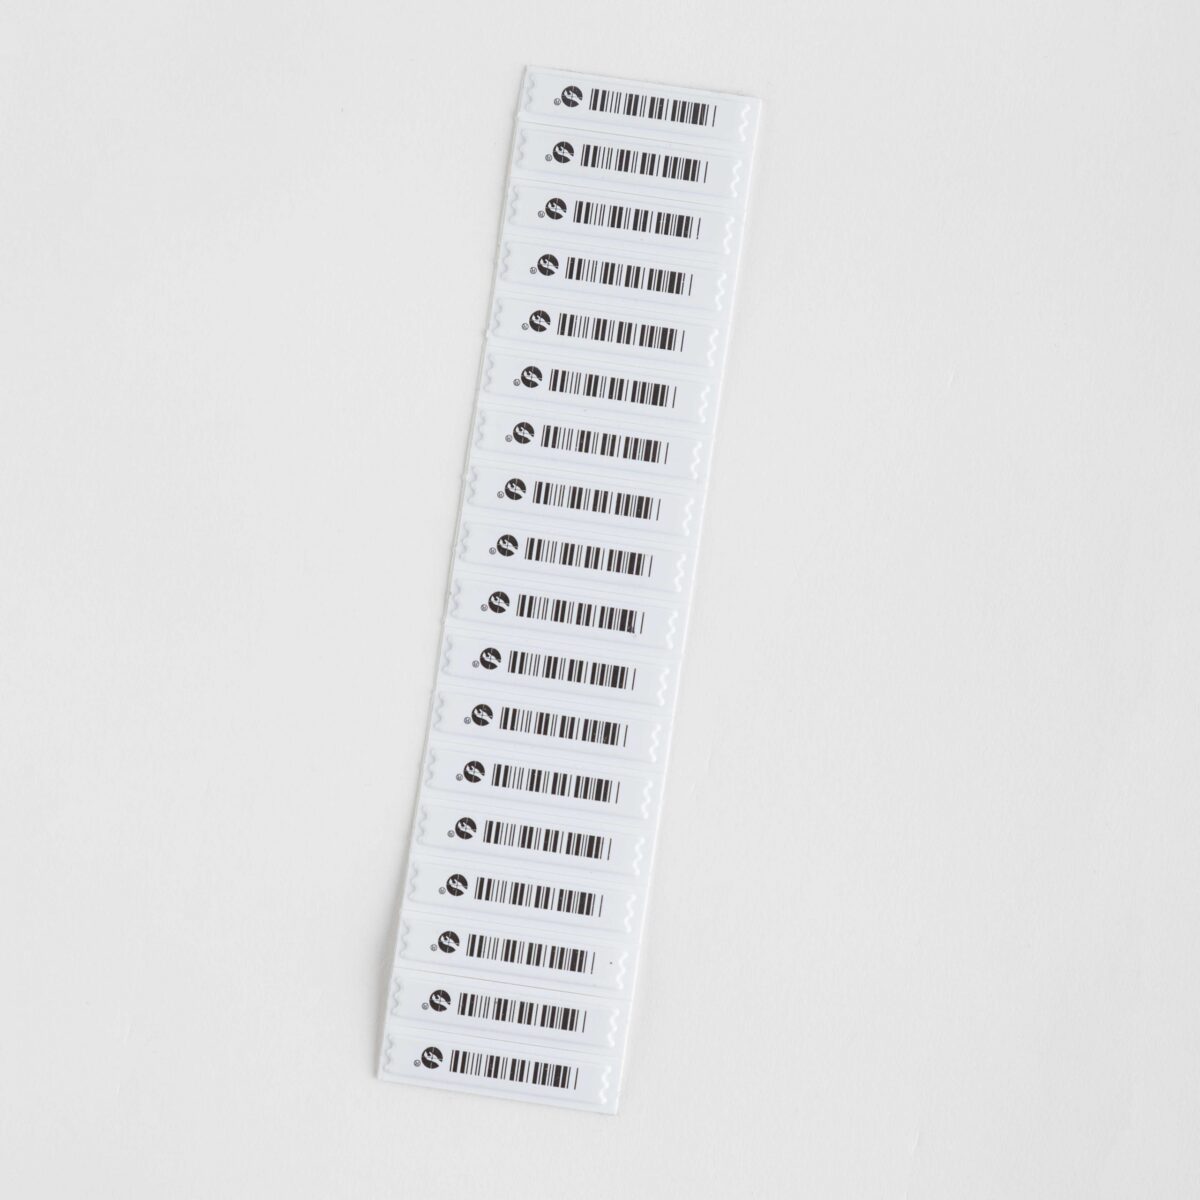 Barcoded Frequency Security Labels (1000 Pc)